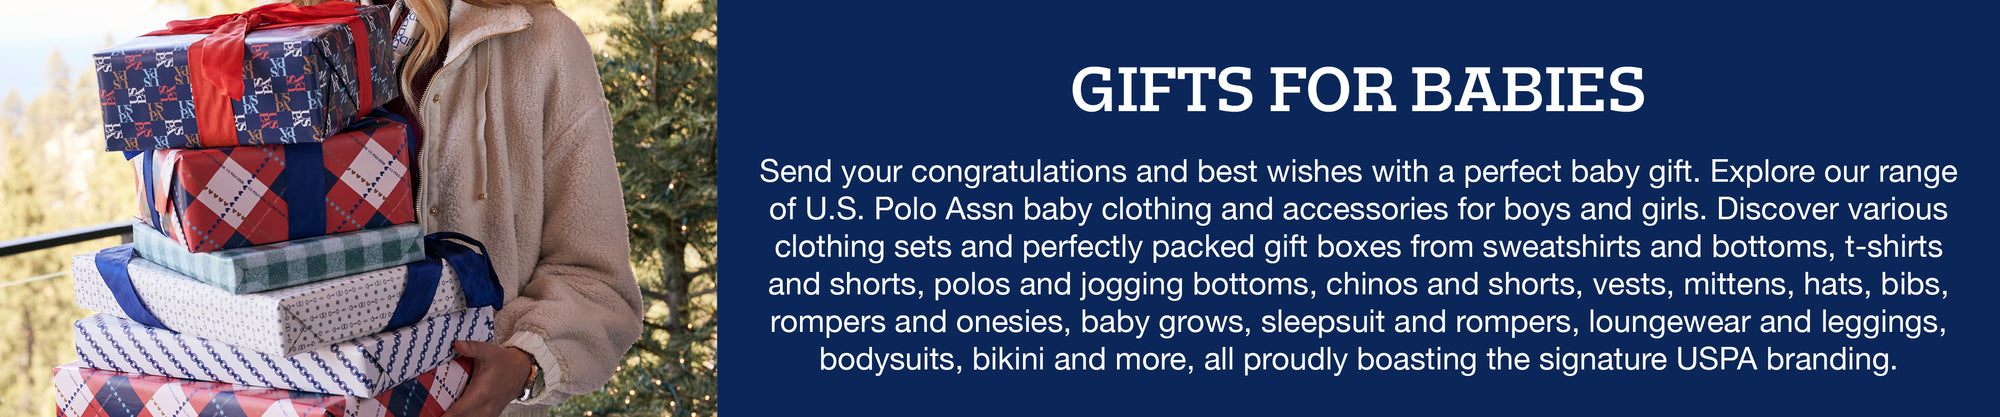  Celebrate new arrivals with the perfect baby gift! Choose from a range of U.S. Polo Assn baby clothing & accessories for boys and girls, featuring sets, gift boxes, rompers, bodysuits, and more - all proudly bearing our signature branding.